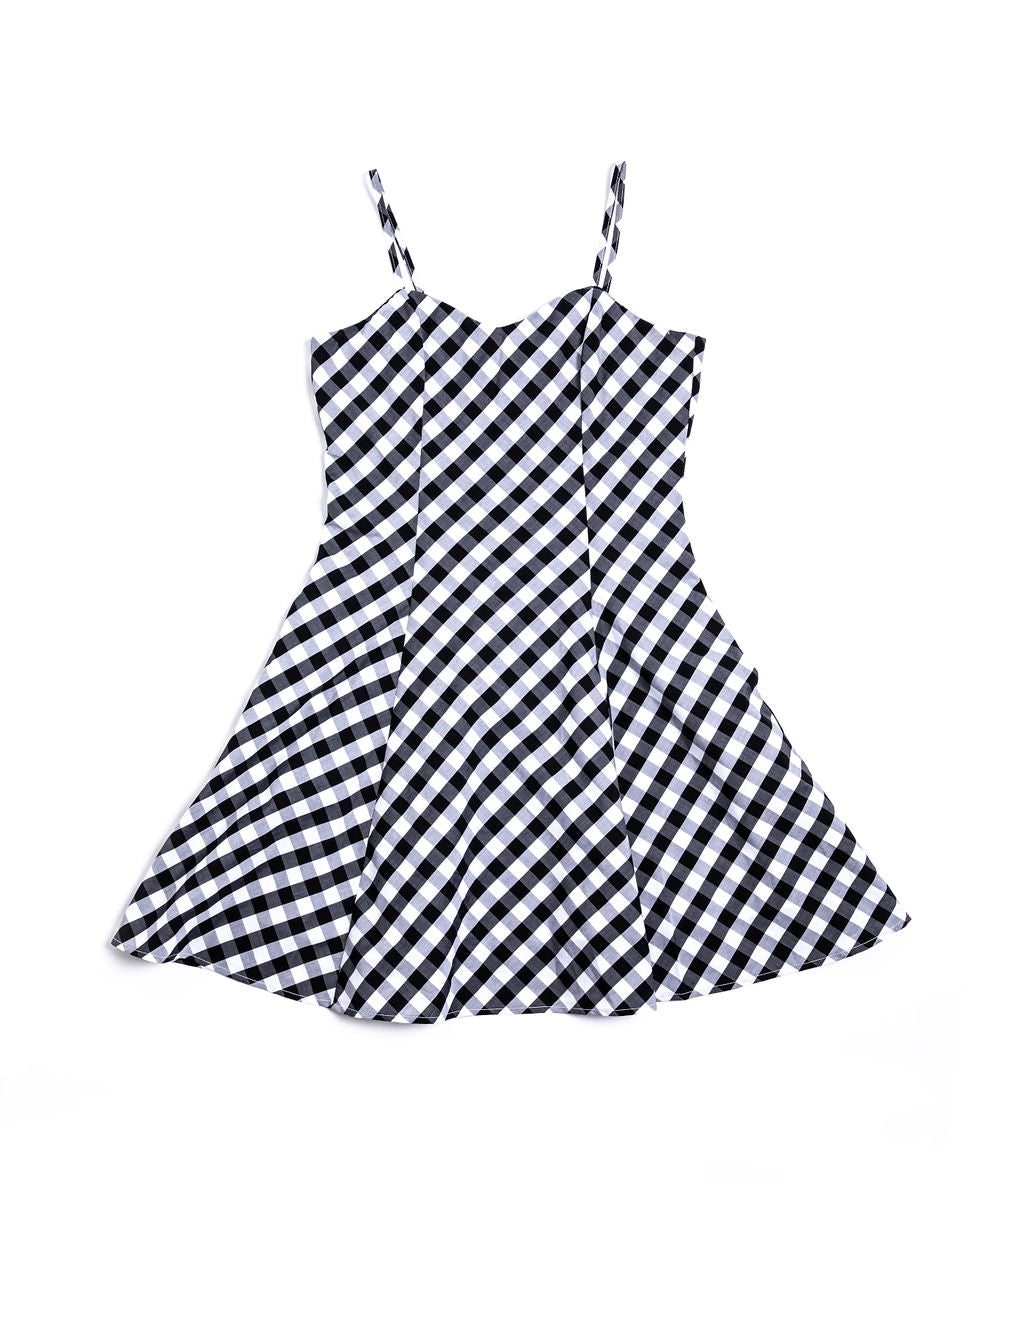 Gingham Skater Dress - The Skater Dress is full of tricks — a silhouette fit for cocktail parties, enough length to keep you covered when you’re catching air, and pockets. It’s fun to twirl in, too. What more does a skater girl (or skater girl at heart) need?